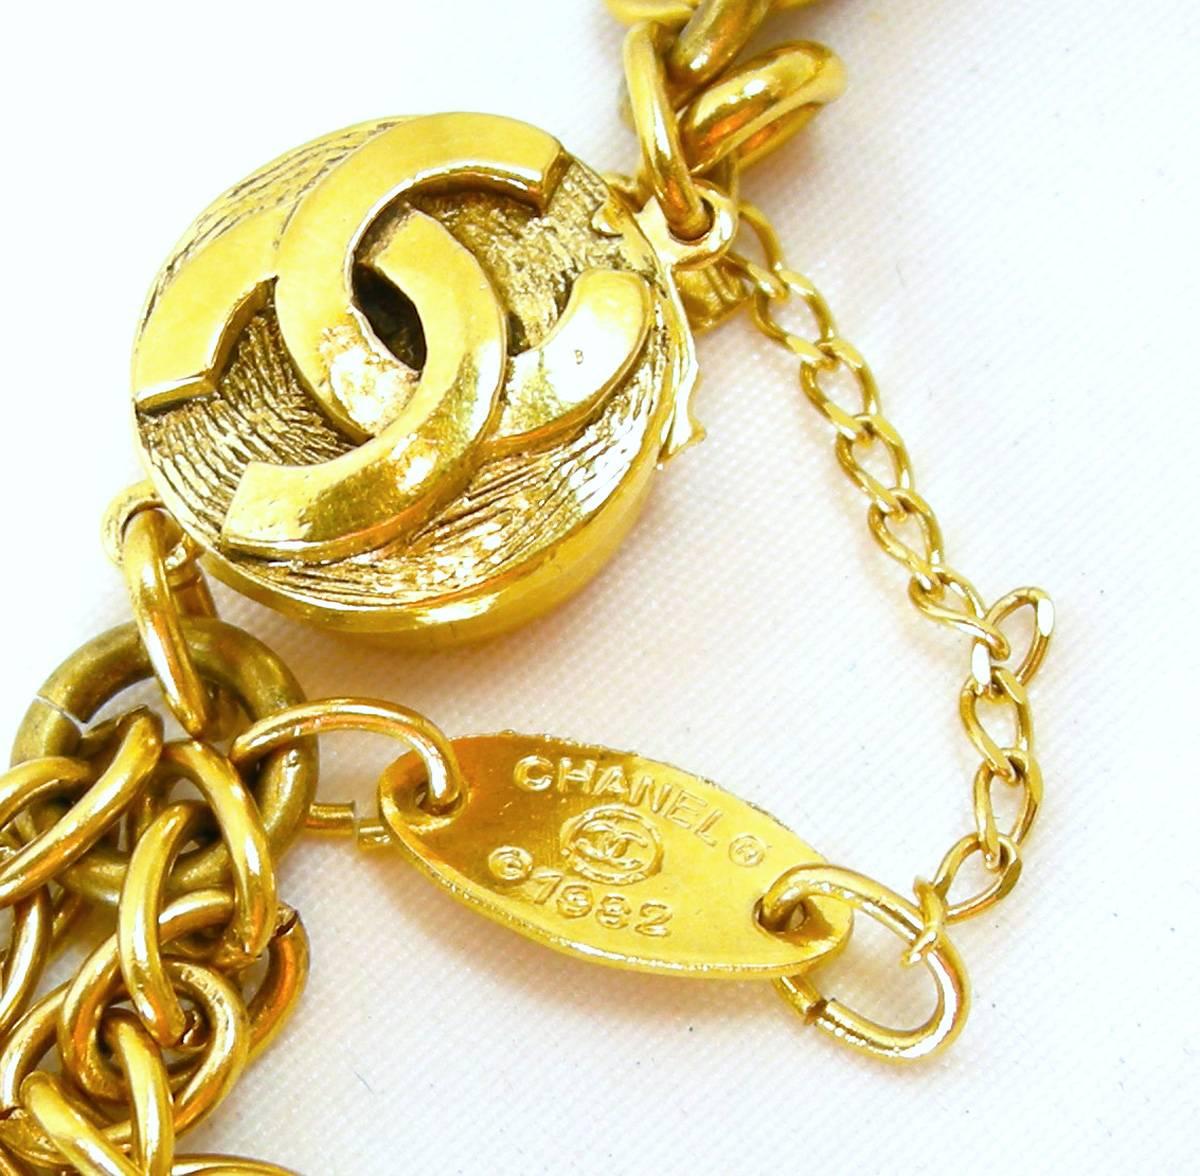 This vintage Chanel sautoir necklace is one of the most sought after sautoirs because it can be doubled … it’s 34”.  It can be worn doubled.  It has green Gripoix glass on each side of an oval medallion with a green Gripoix center … all on a rope